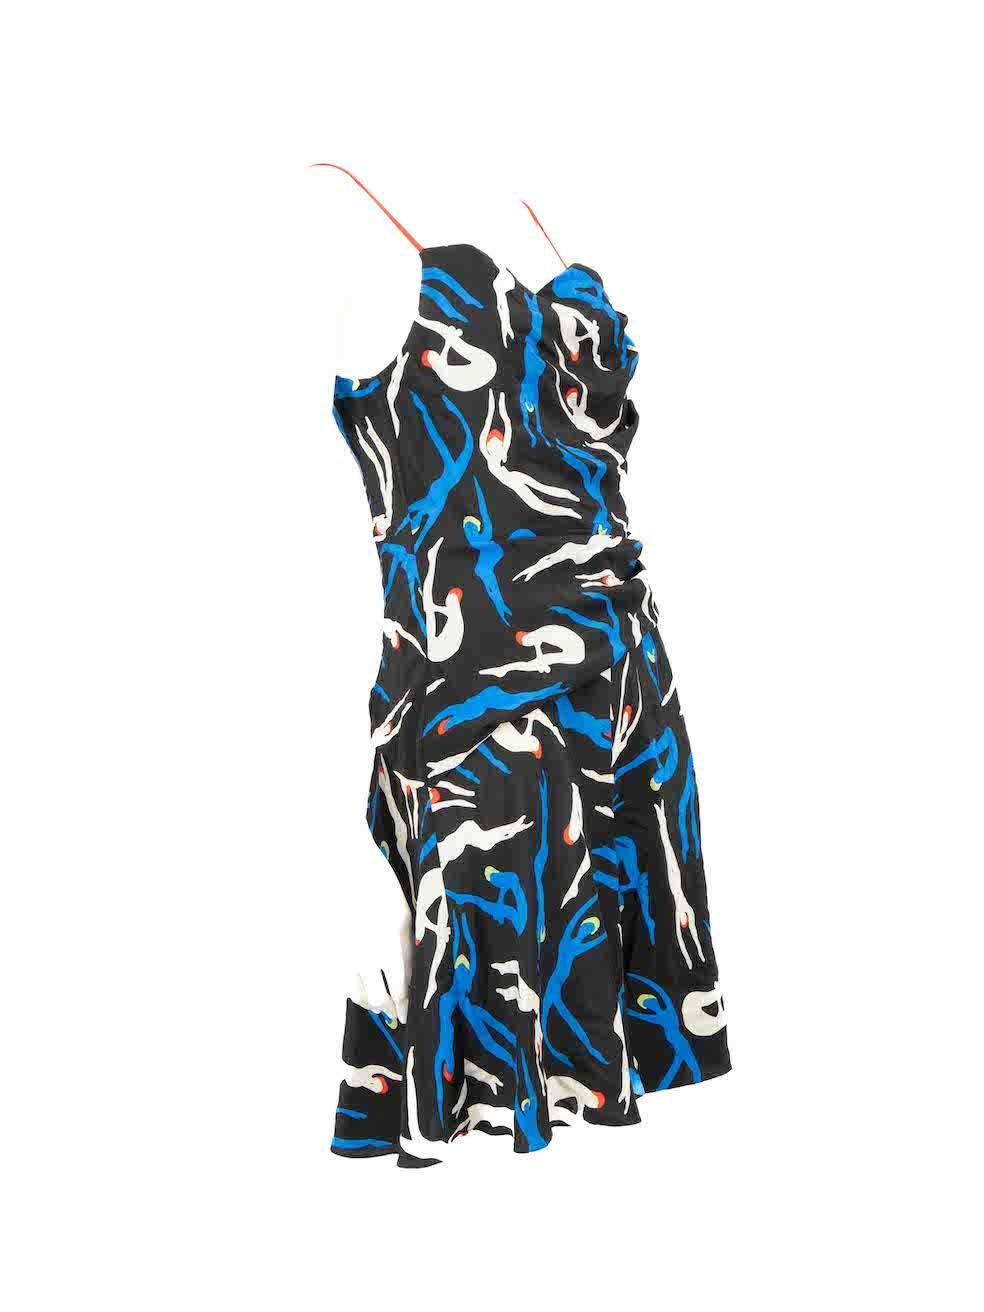 CONDITION is Very good. Minimal wear to dress is evident. Minimal wear to the bottom left side and back is seen with discolouration marks on this used Diane Von Furstenberg designer resale item.
 
 
 
 Details
 
 
 Multicolour -Black, white and